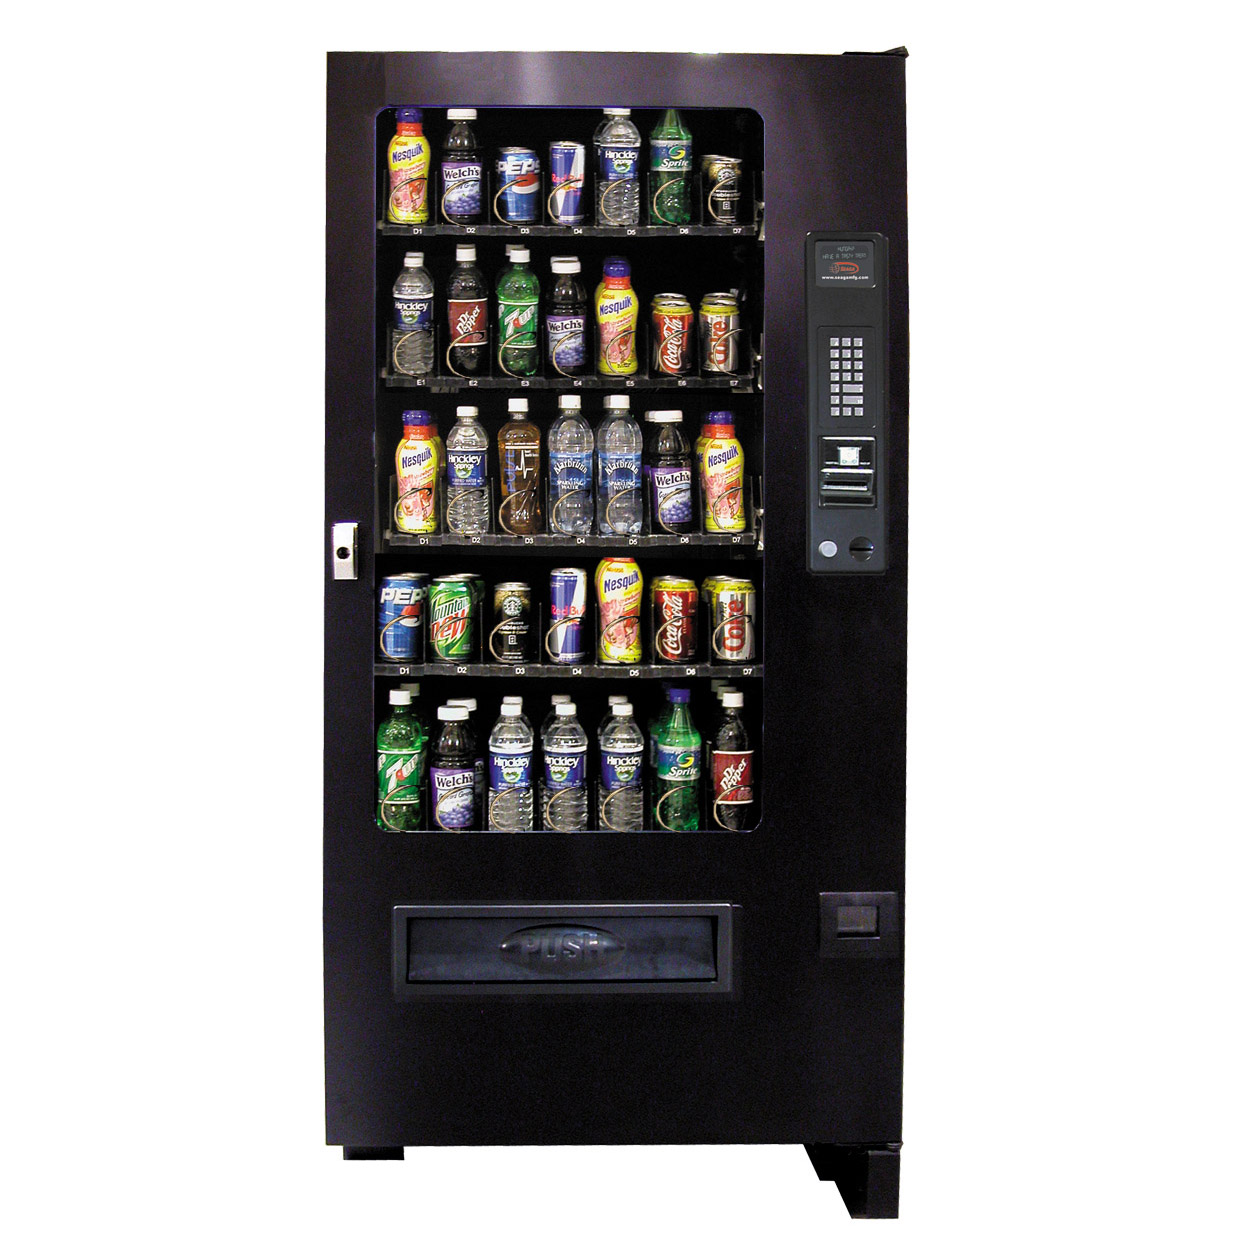 8 Sure-Fire Ways To Do Vending Machine Business Successfully